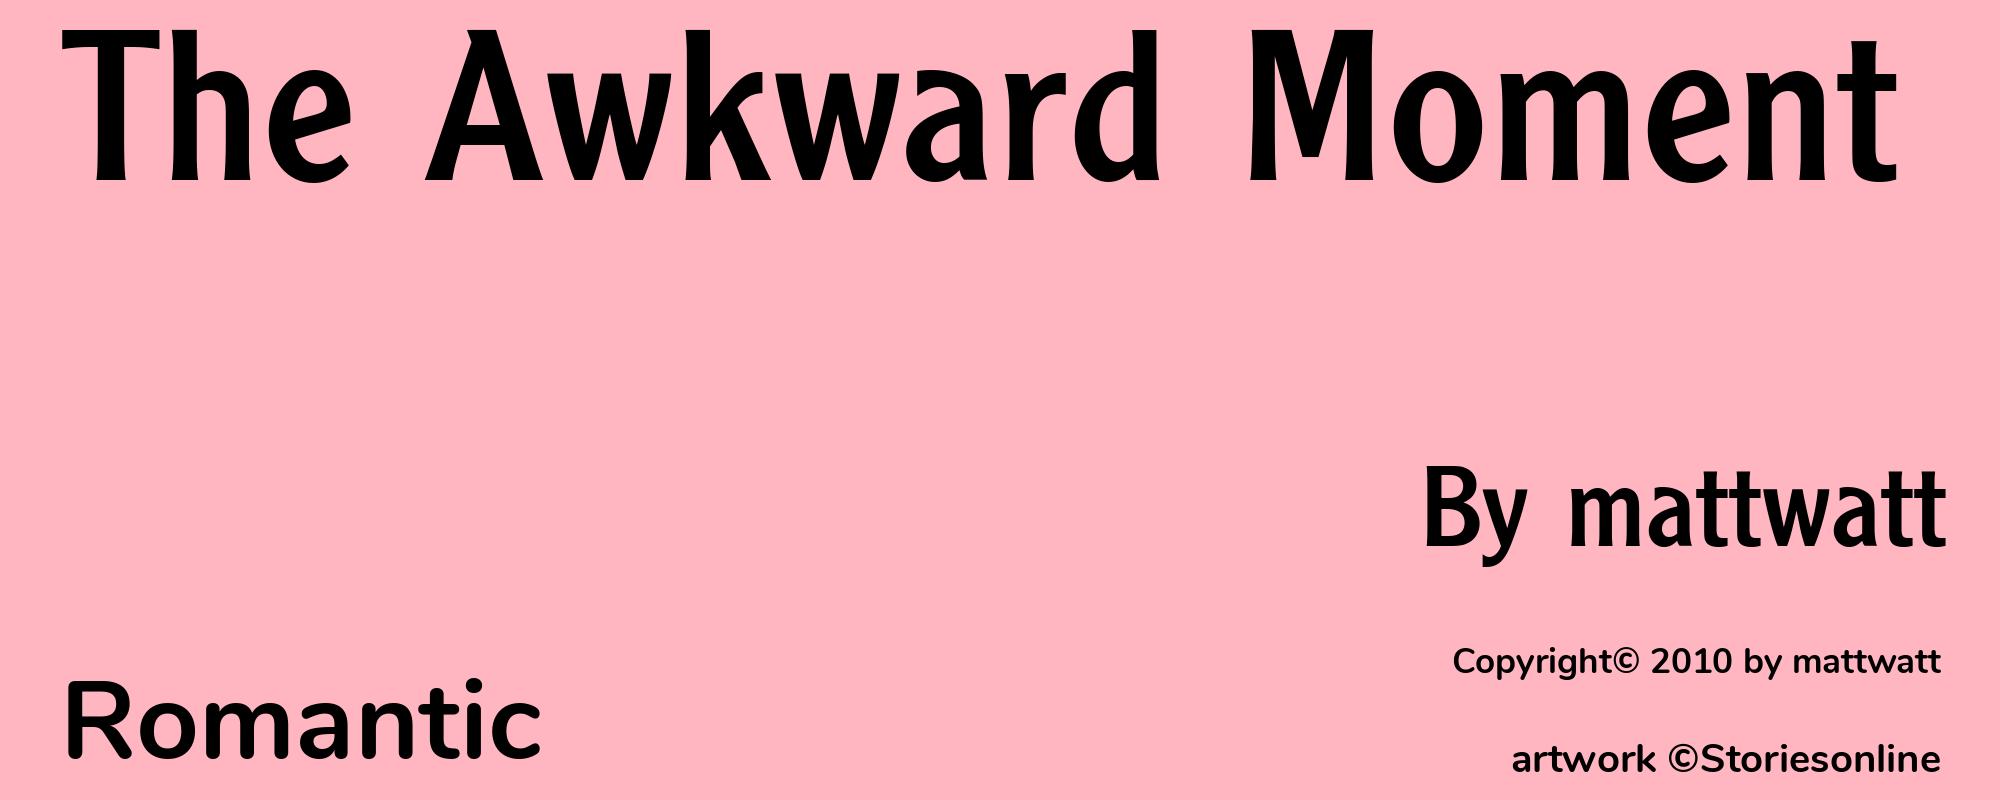 The Awkward Moment - Cover